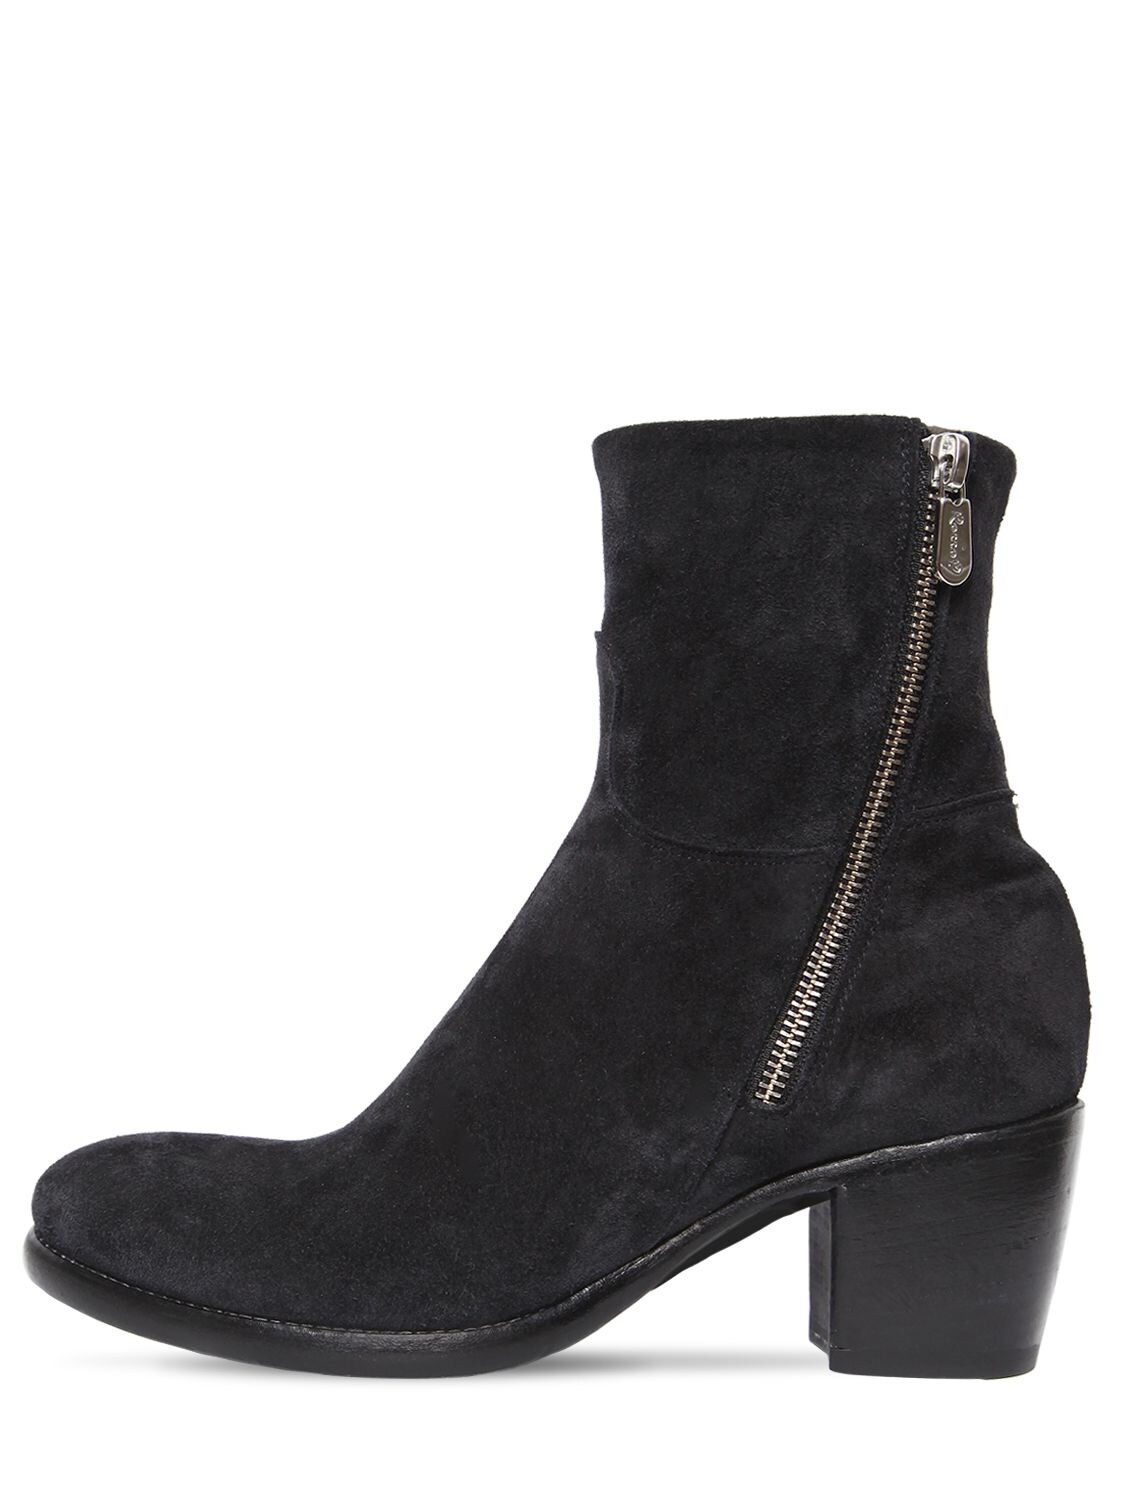 Rocco P 60mm Zipped Suede Ankle Boots In Black